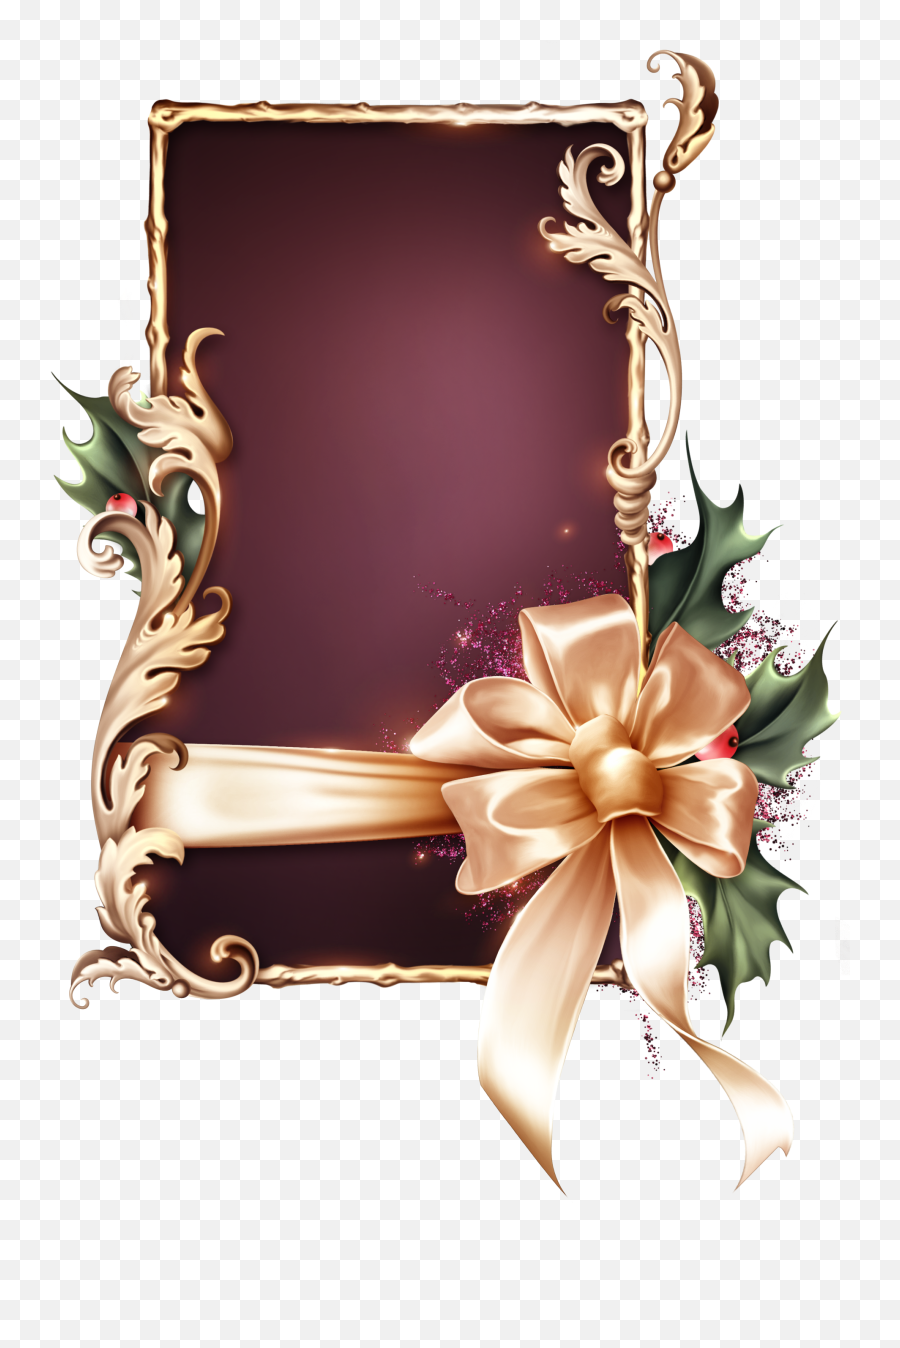 Download Ornate Christmas Decor Dividers Christmas - Christmas Decoration Emoji,Christmas Decorations Png